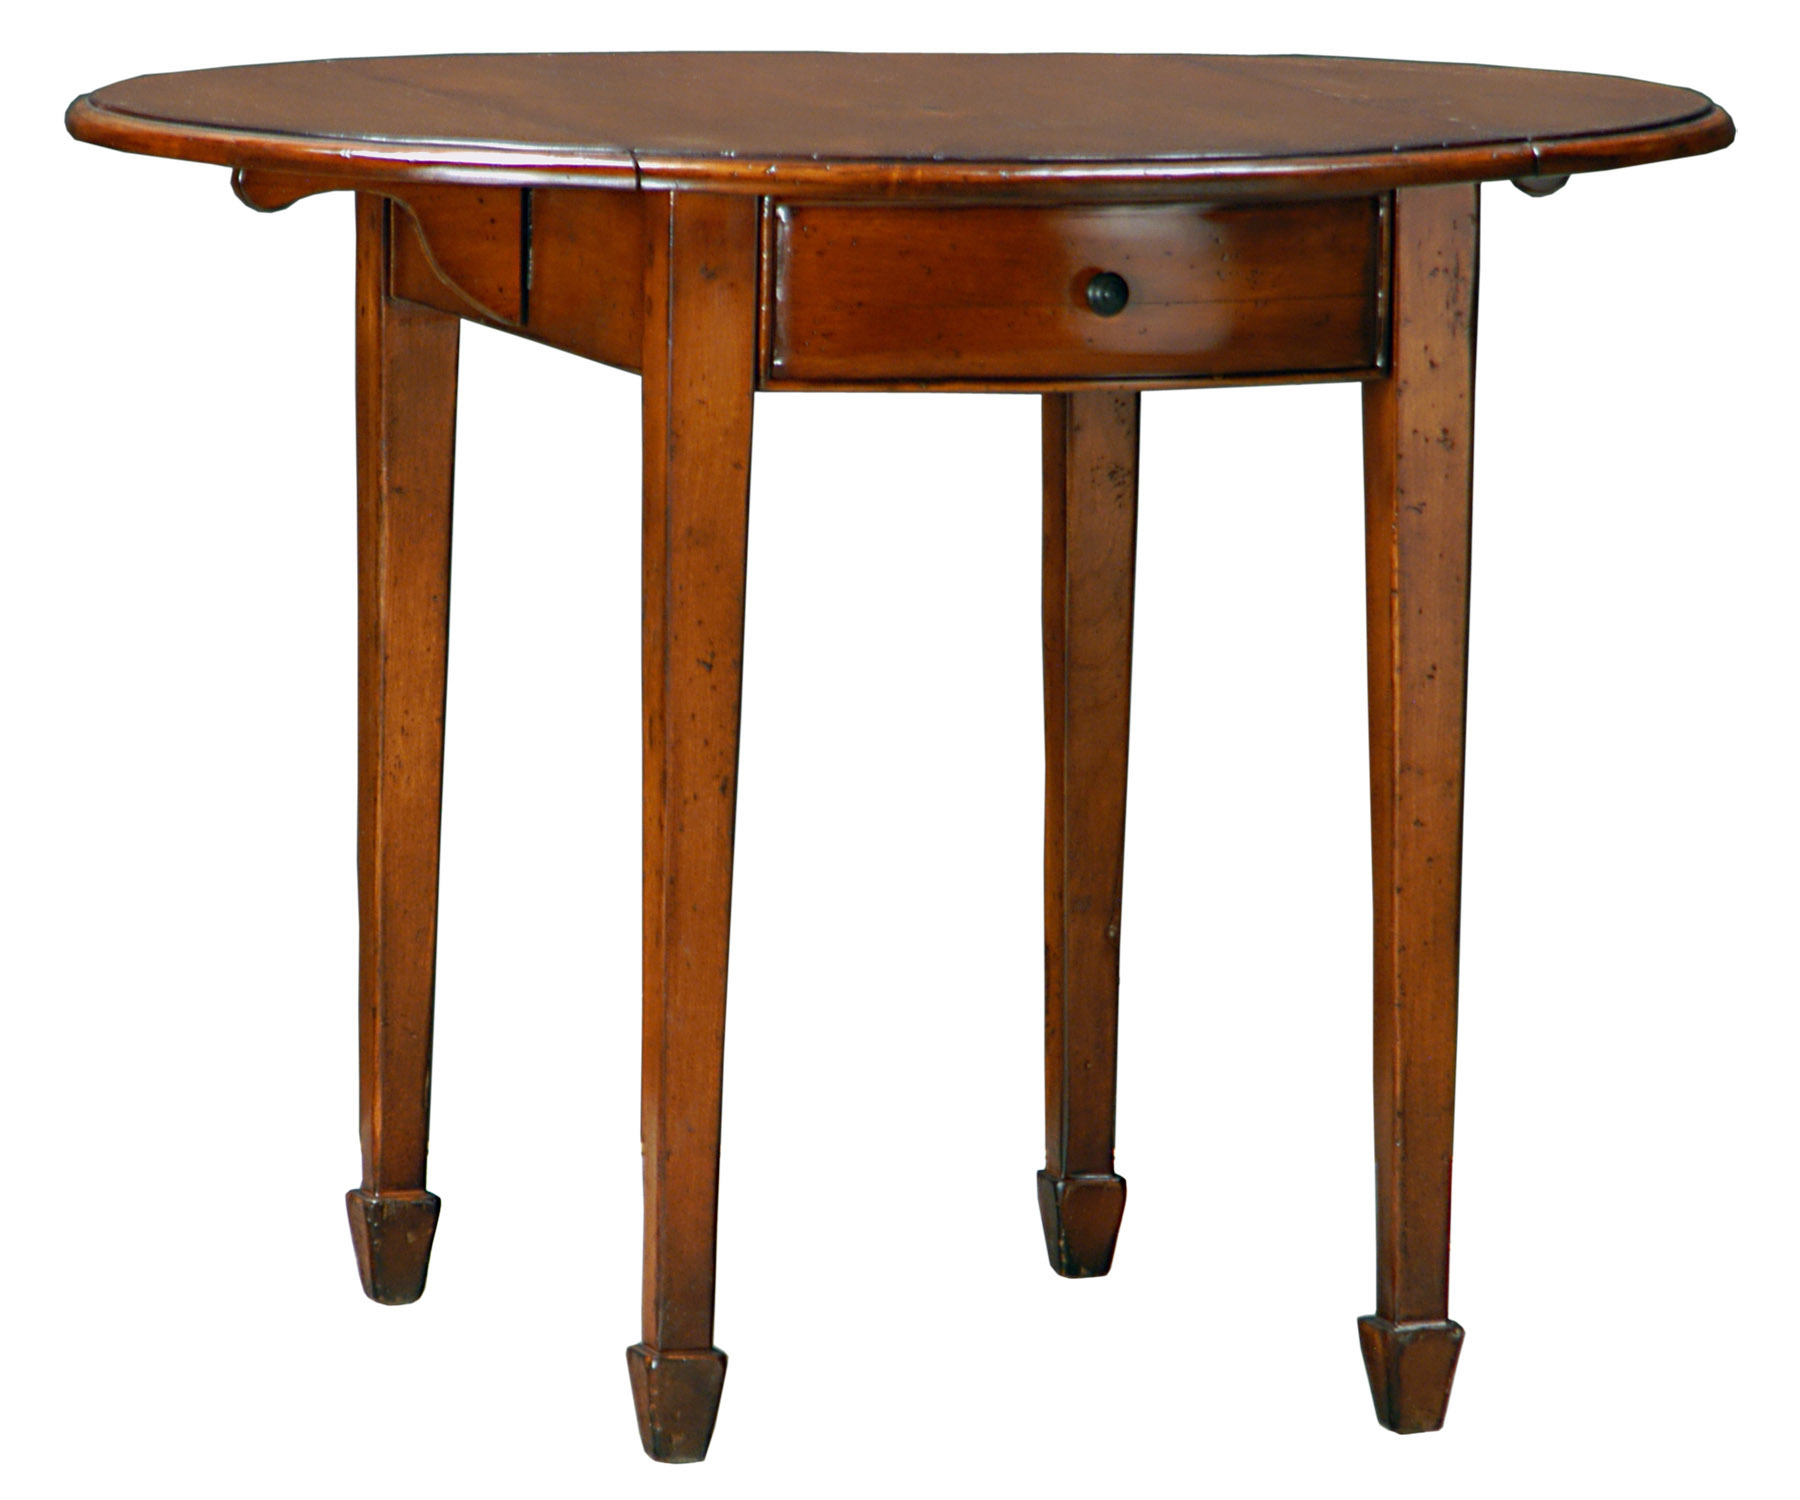 Bryant traditional transitional drop-leaf round side or end table by Woodland furniture in Idaho Falls